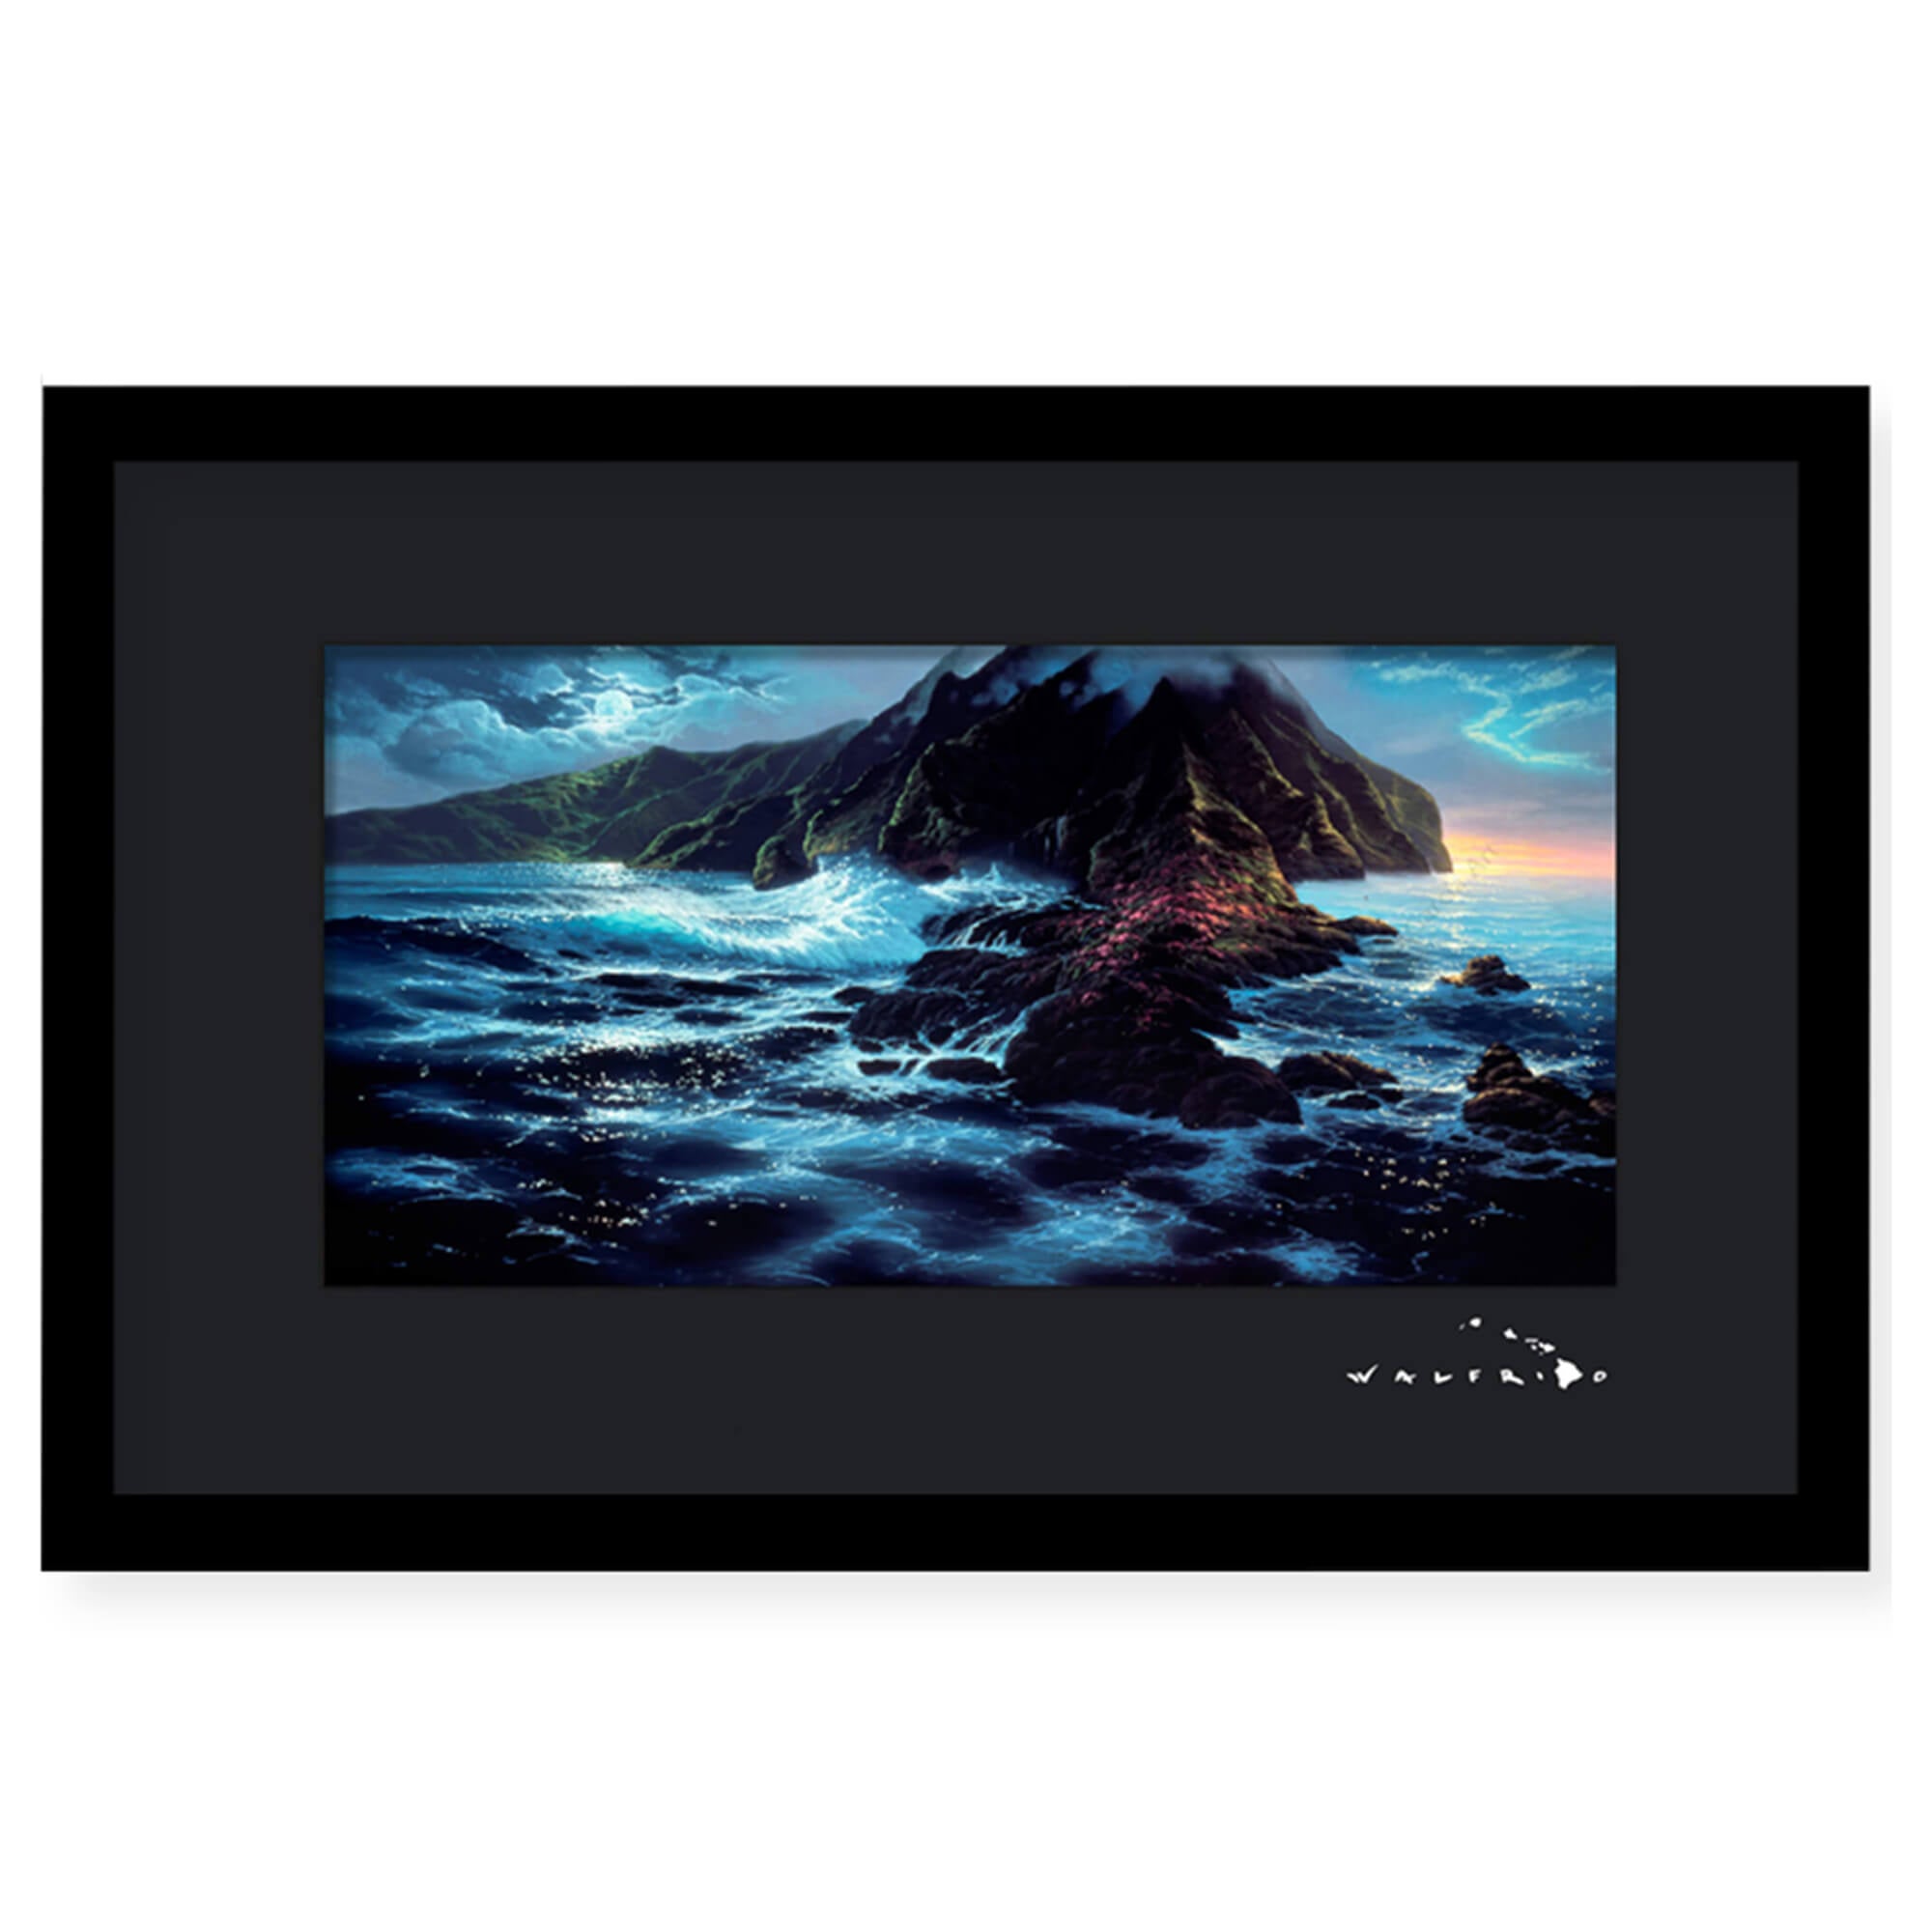 Framed matted art print of a churning ocean with a tropical island rising up in the distance by Hawaii artist Walfrido Garcia